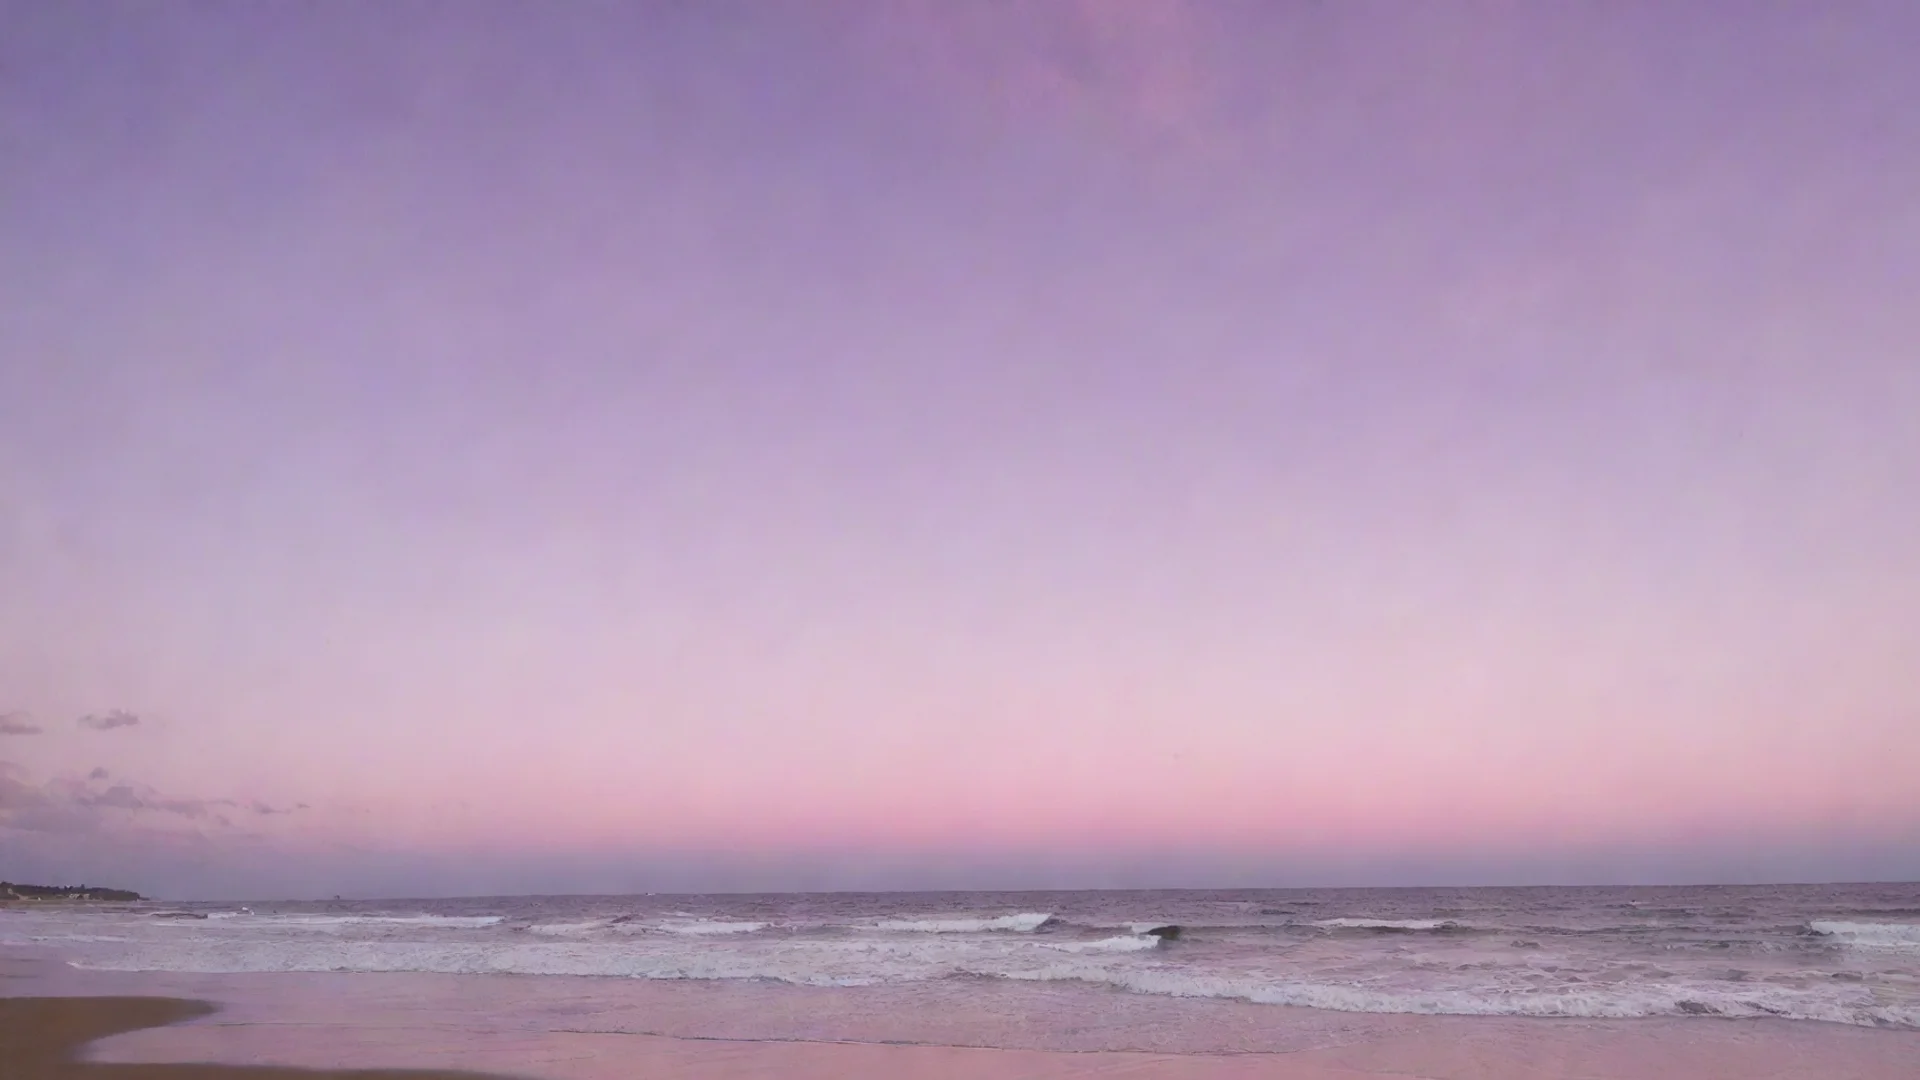 aipurple pink sky at a beach wide